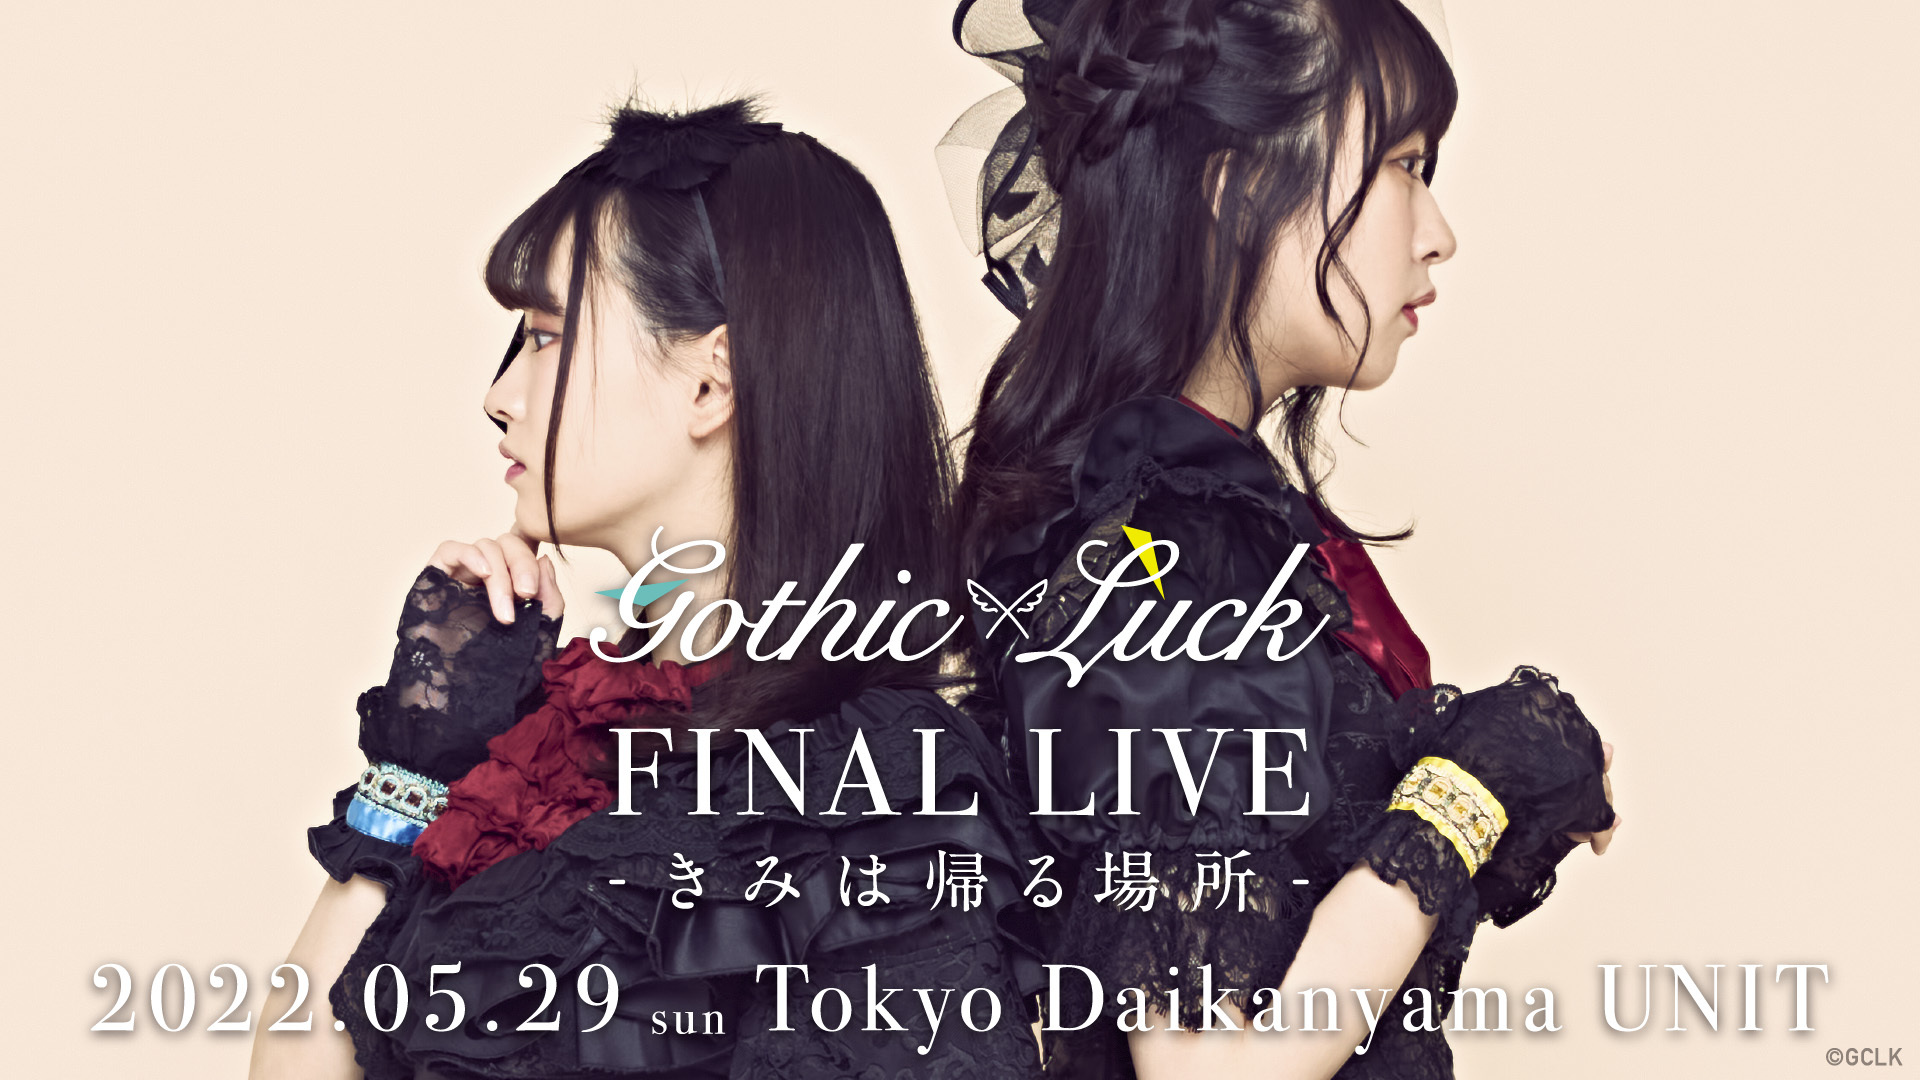 『Gothic×Luck FINAL LIVE -きみは帰る場所-』